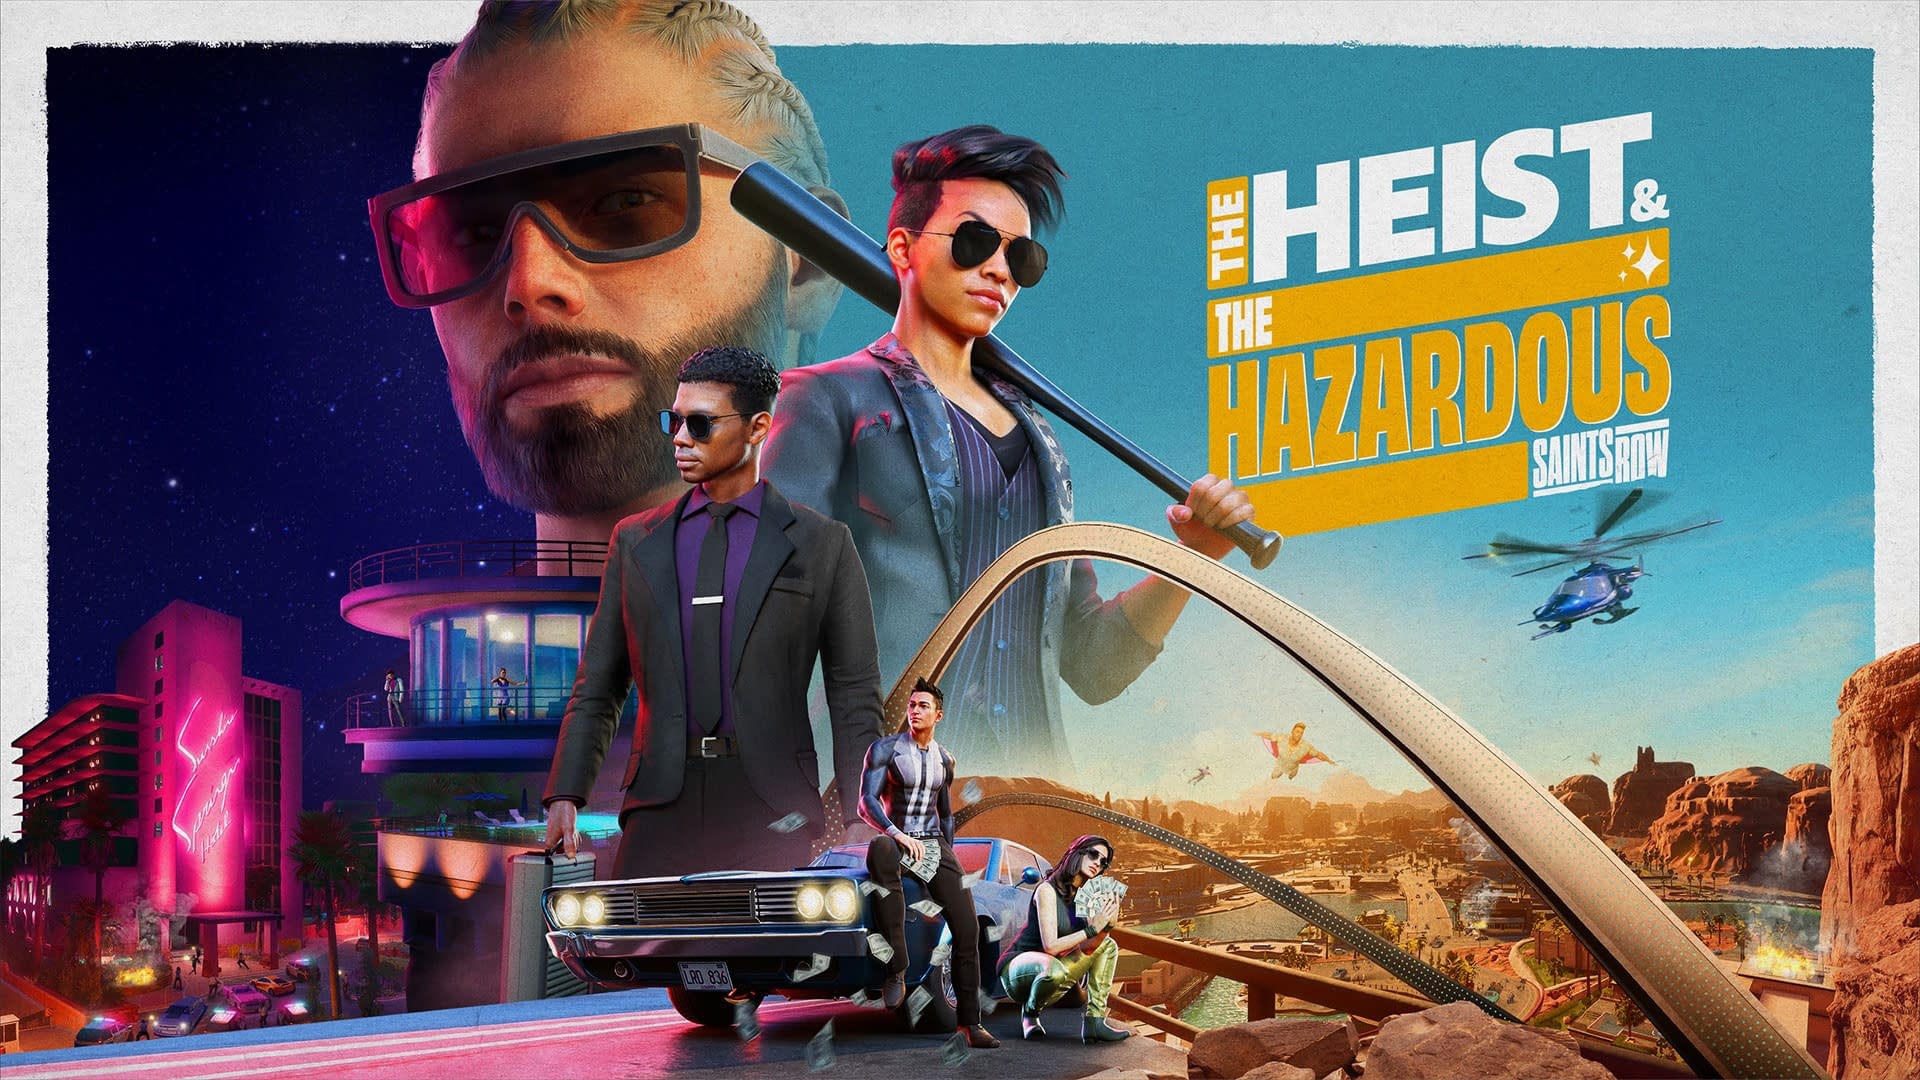 Heists DLC - Story Mode Expansion Pack 